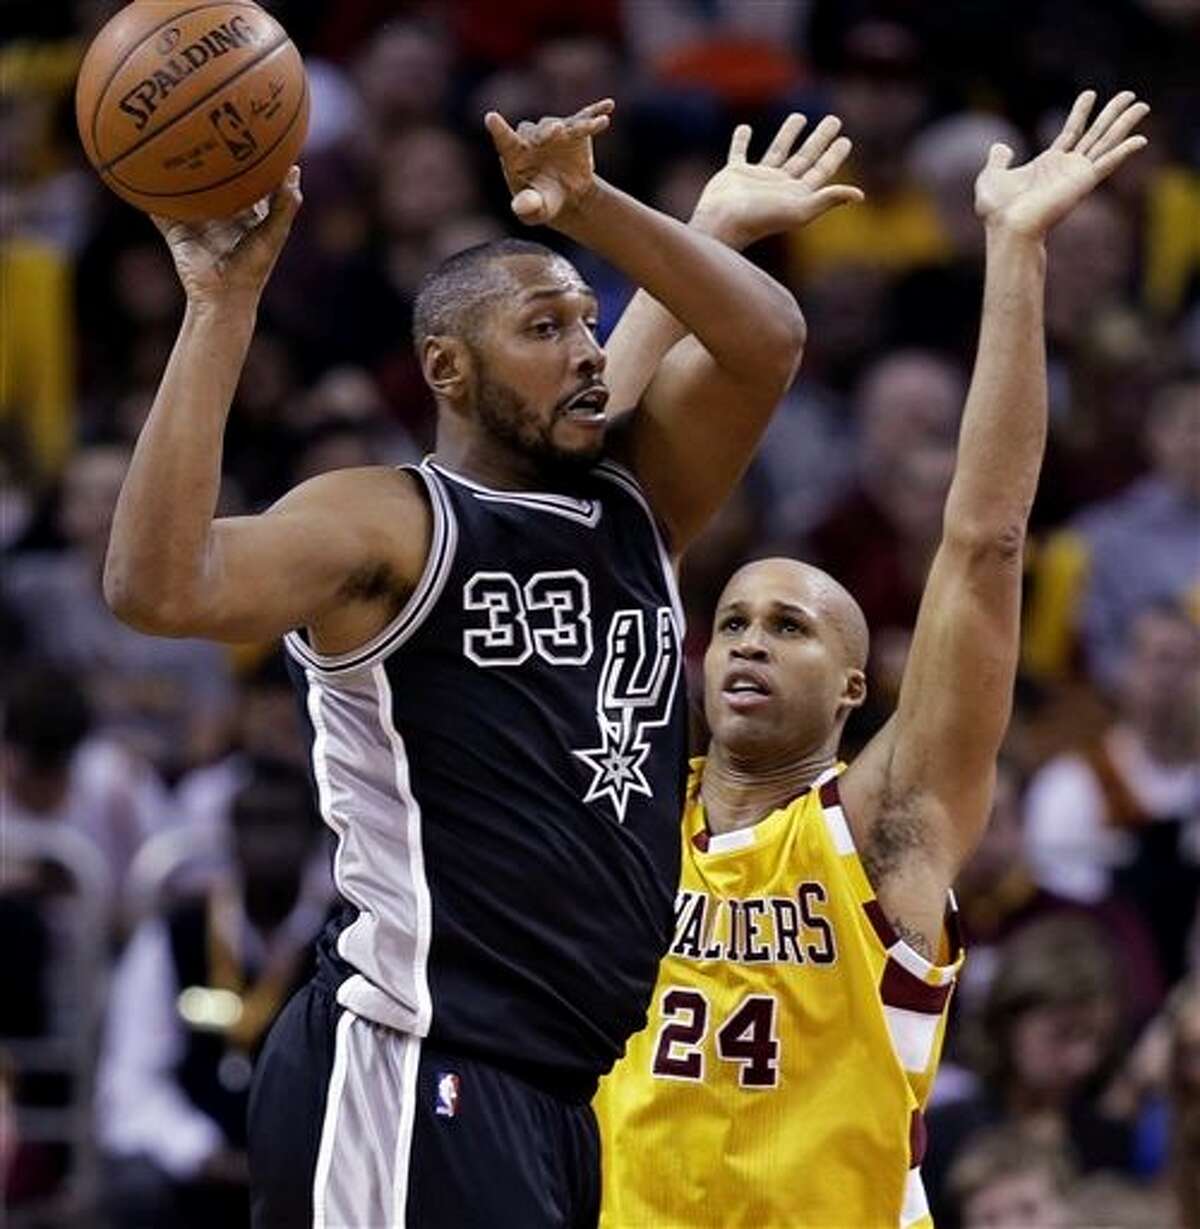 San Antonio Spurs' Boris Diaw (33) passes in front of Cleveland Cavaliers' Richard Jefferson (24) during the first half of an NBA basketball game Saturday, Jan. 30, 2016, in Cleveland. (AP Photo/Tony Dejak)